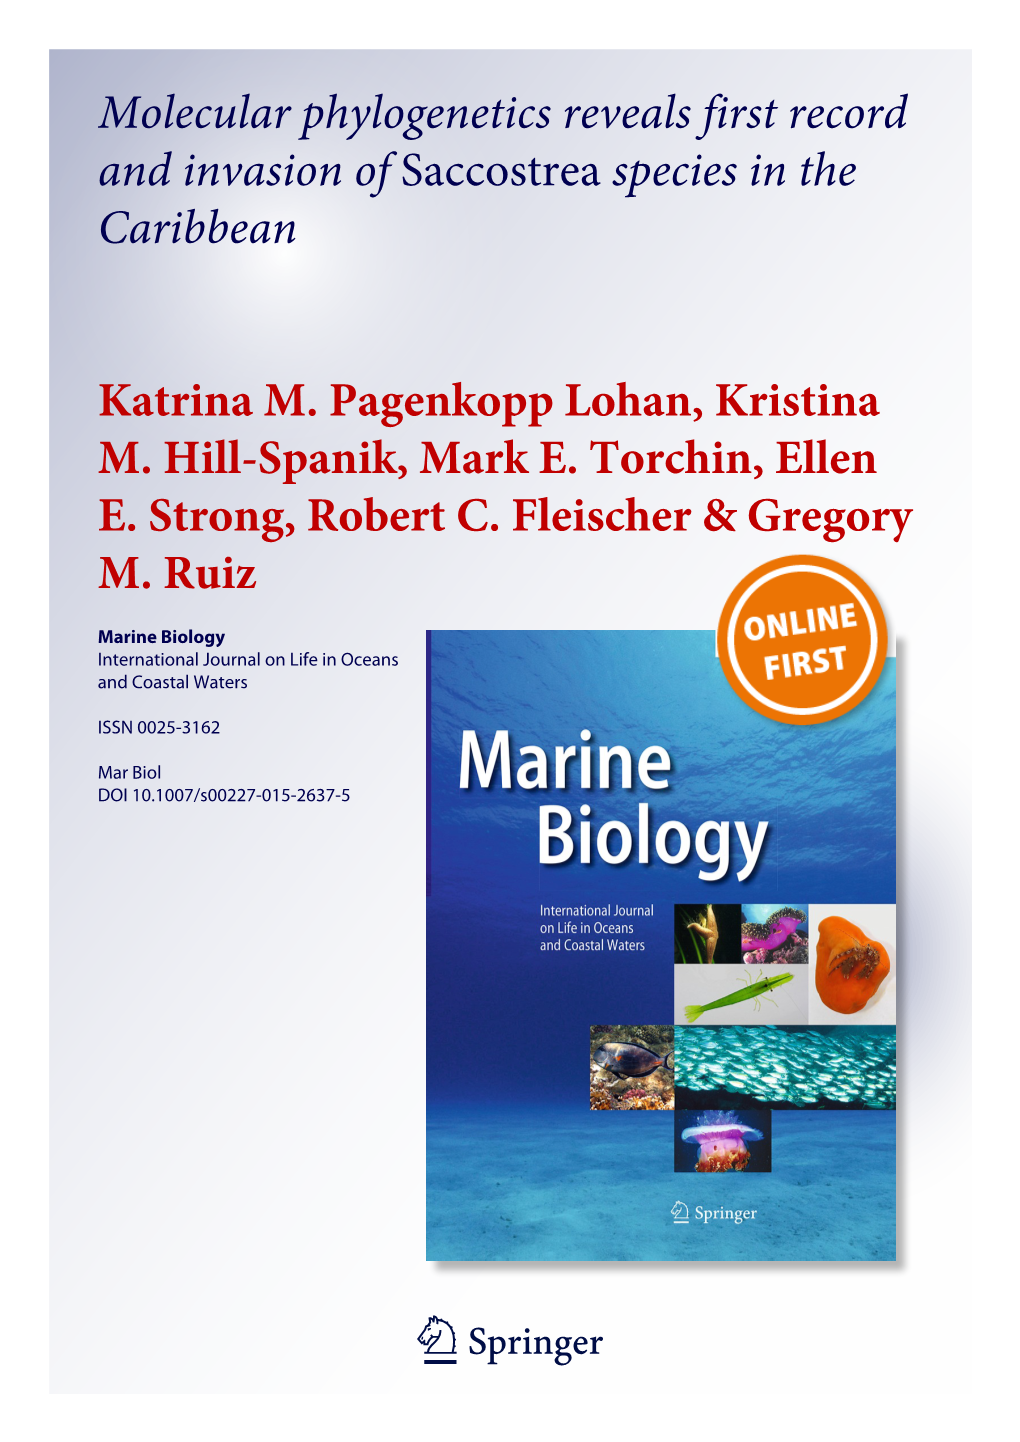 Molecular Phylogenetics Reveals First Record and Invasion of Saccostrea Species in the Caribbean